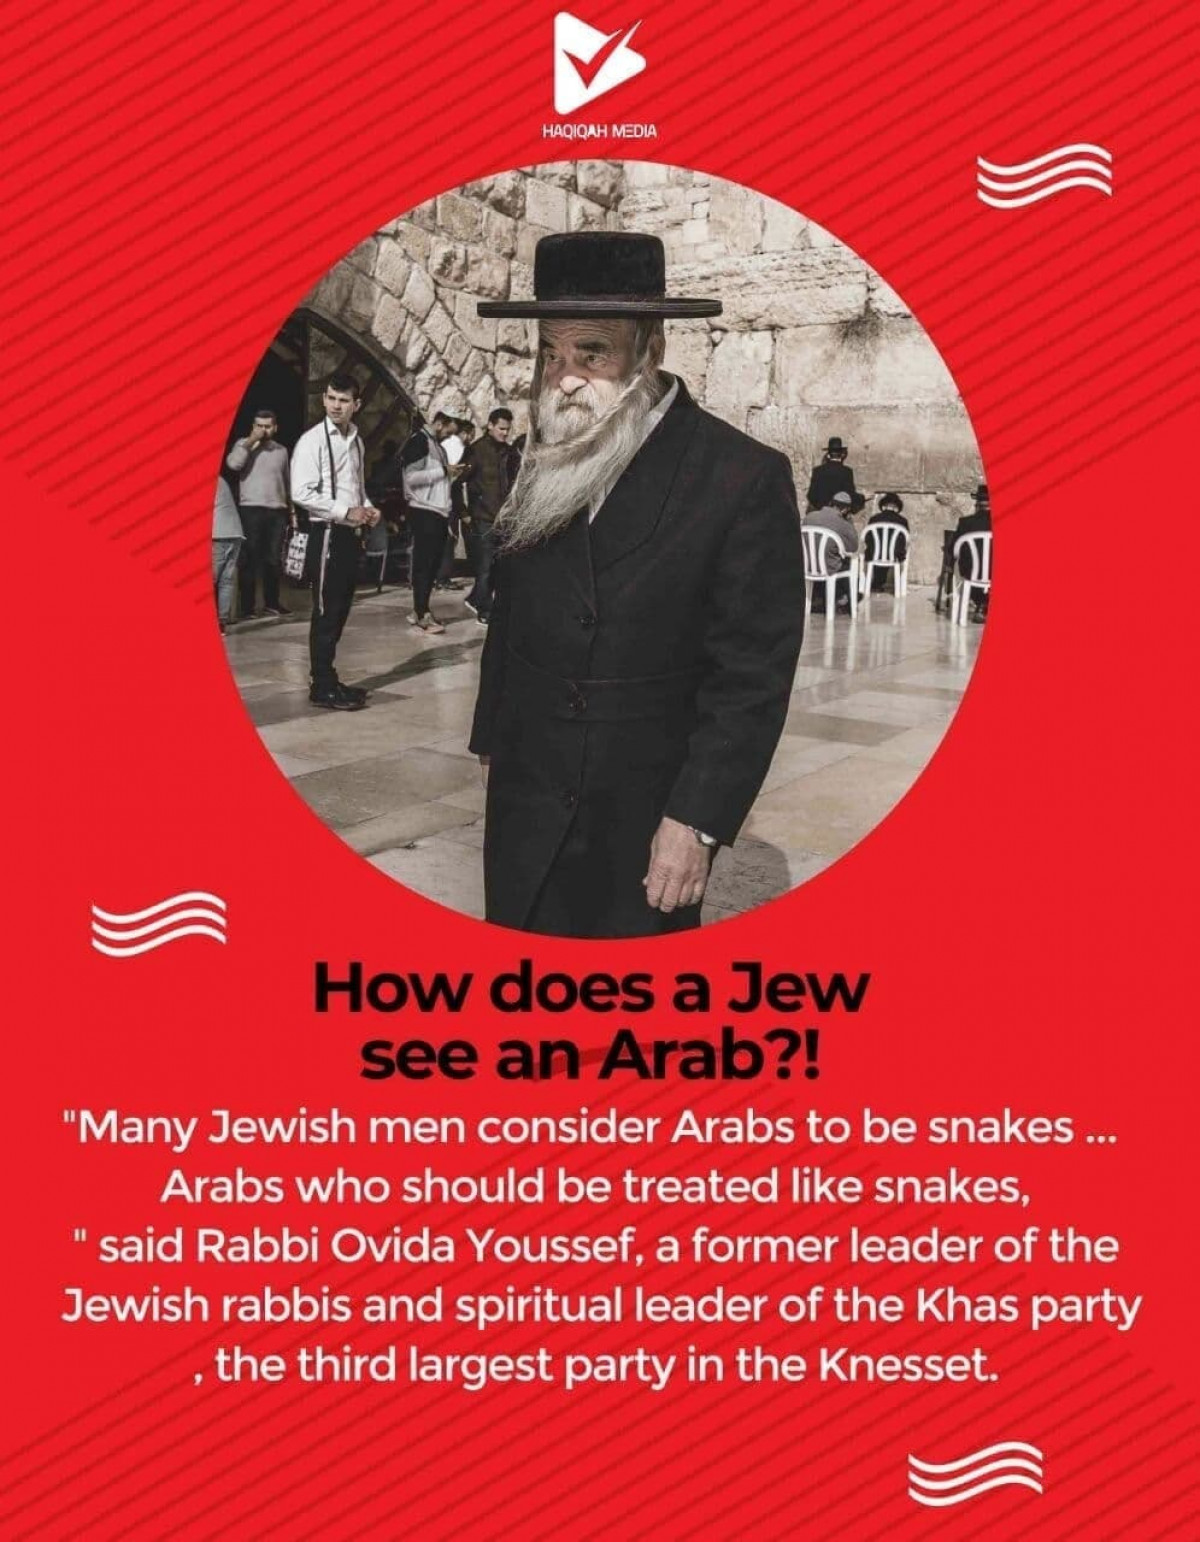 How does a Jew see an Arab?!